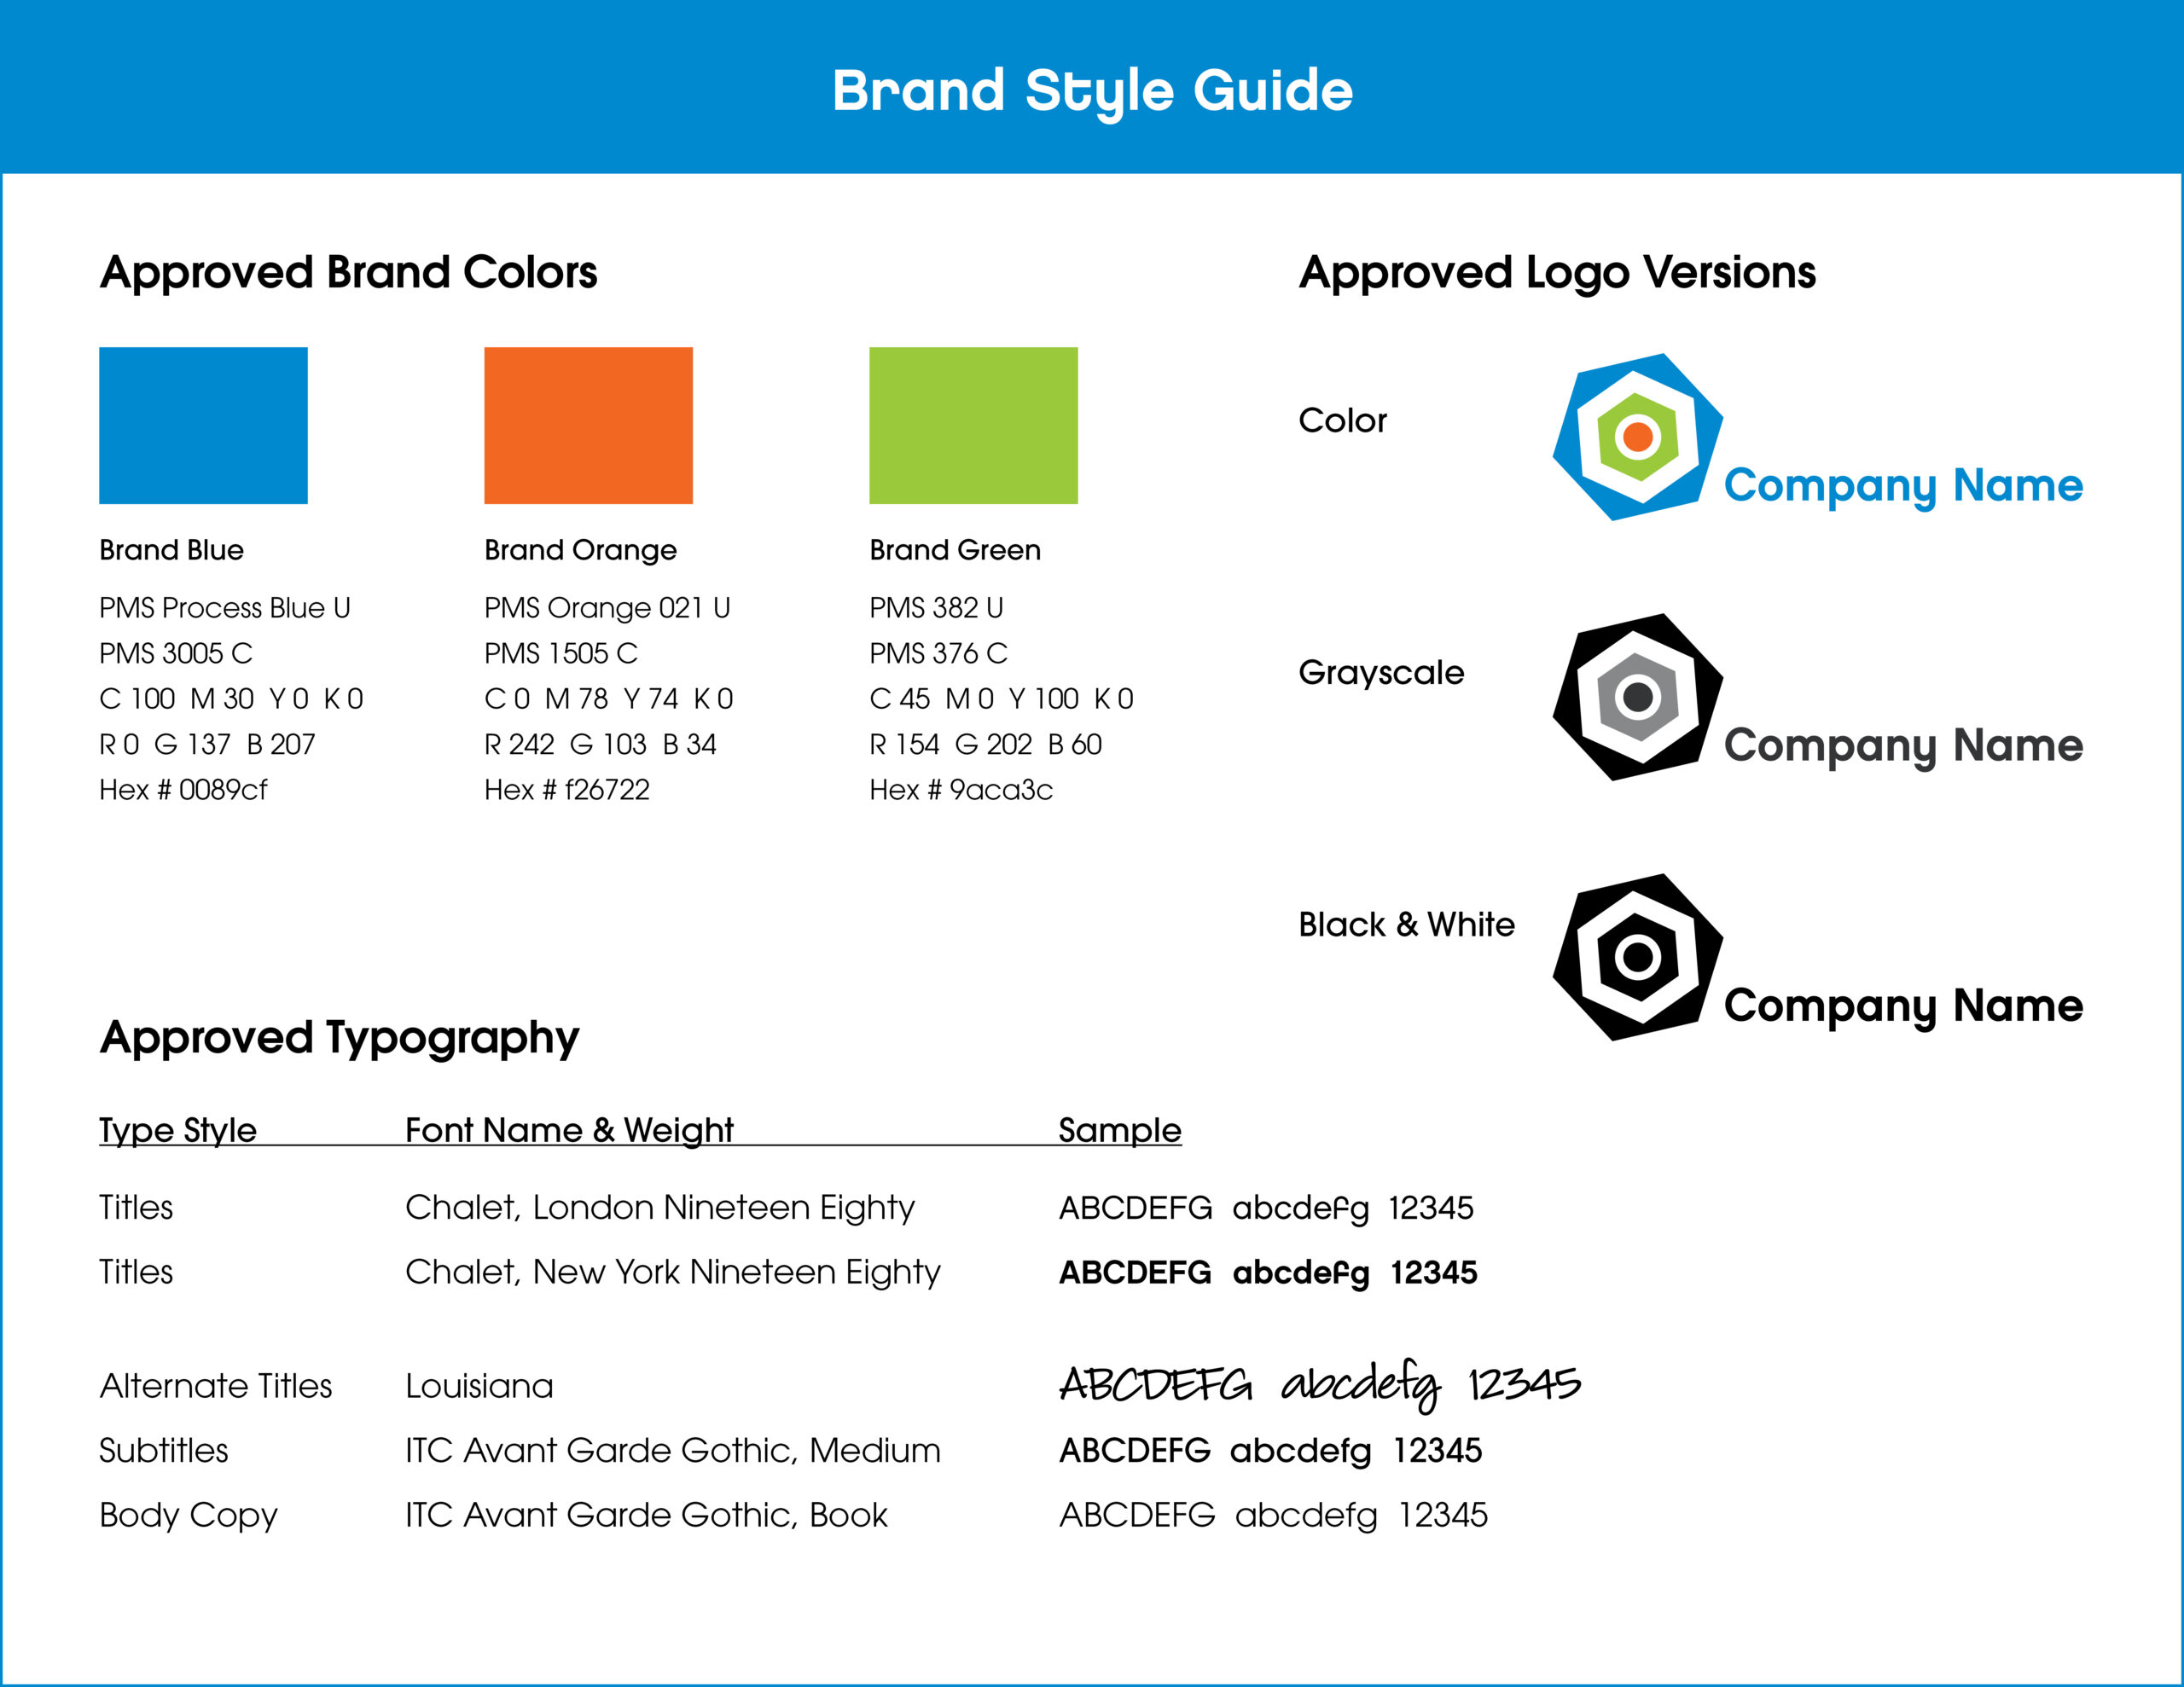 Shows some elements included in a typical brand style guide